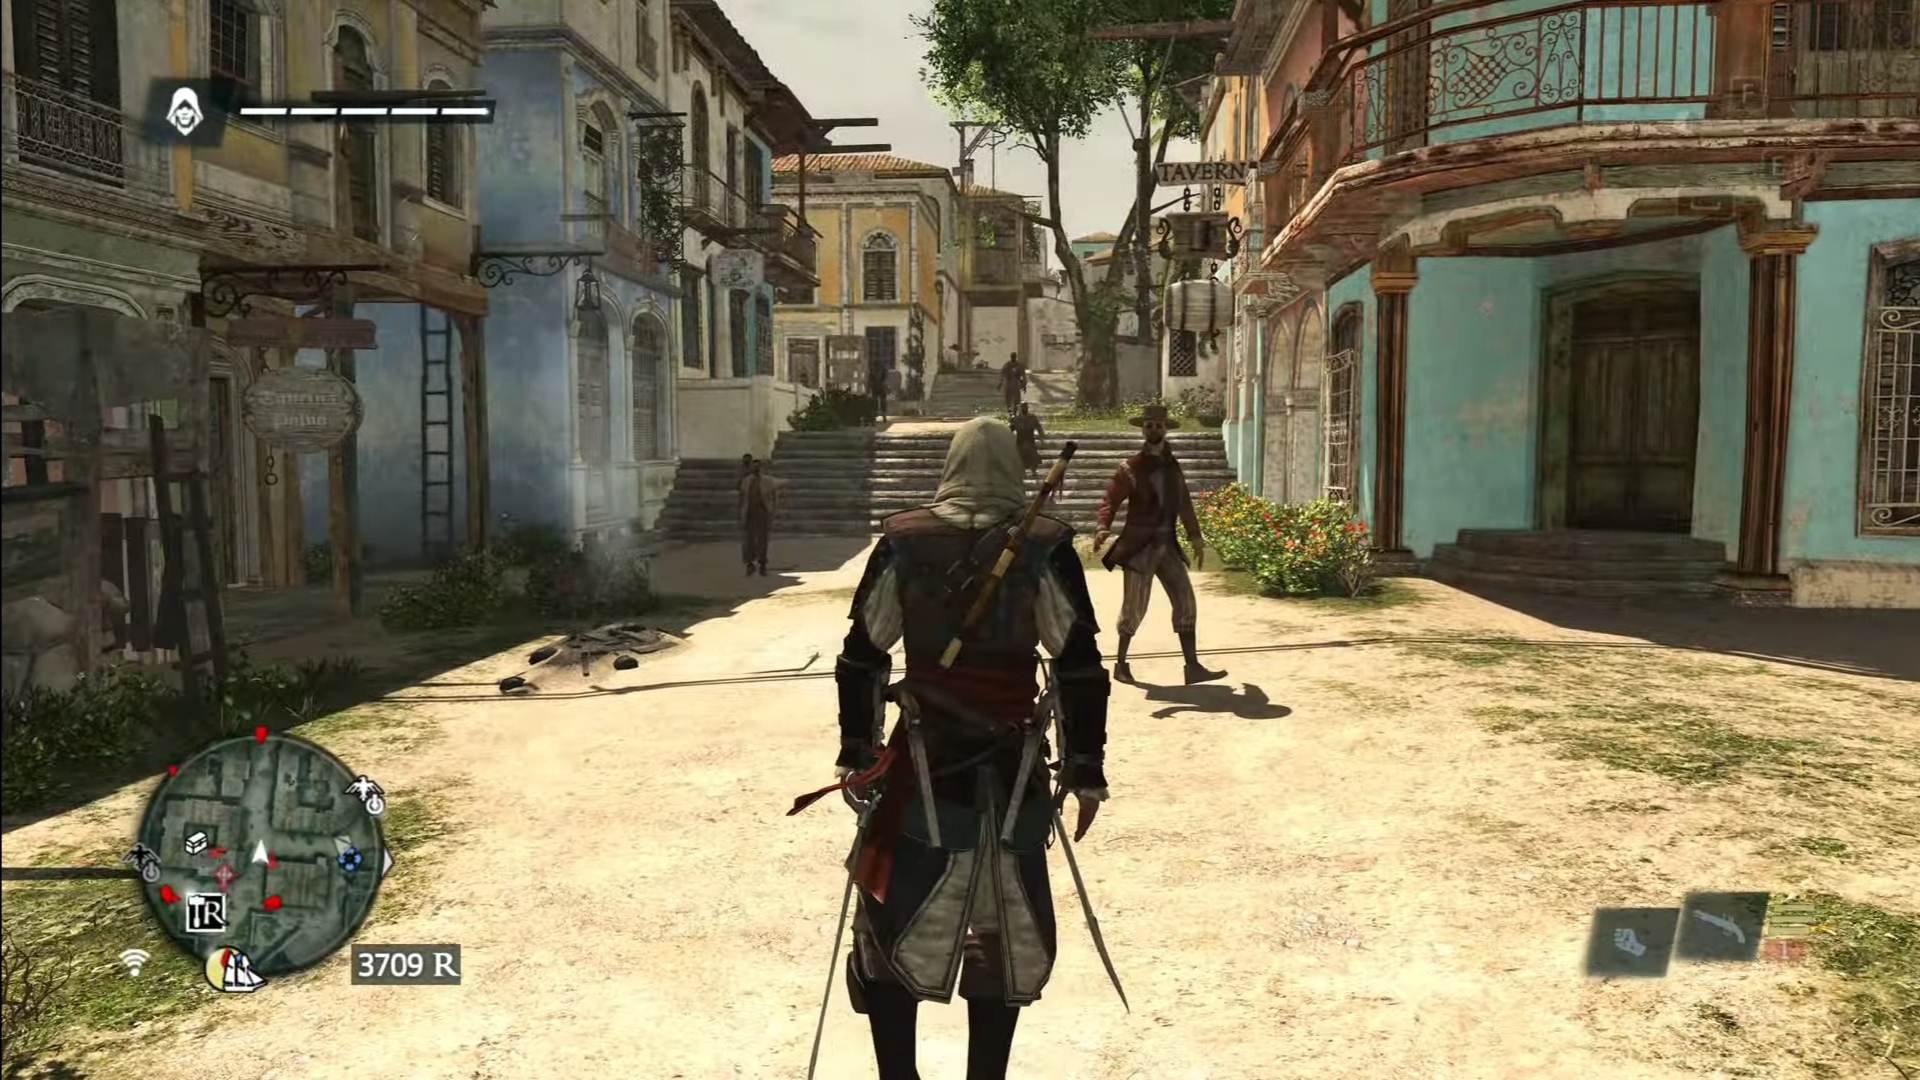 download game assassin creed black flag pc full version